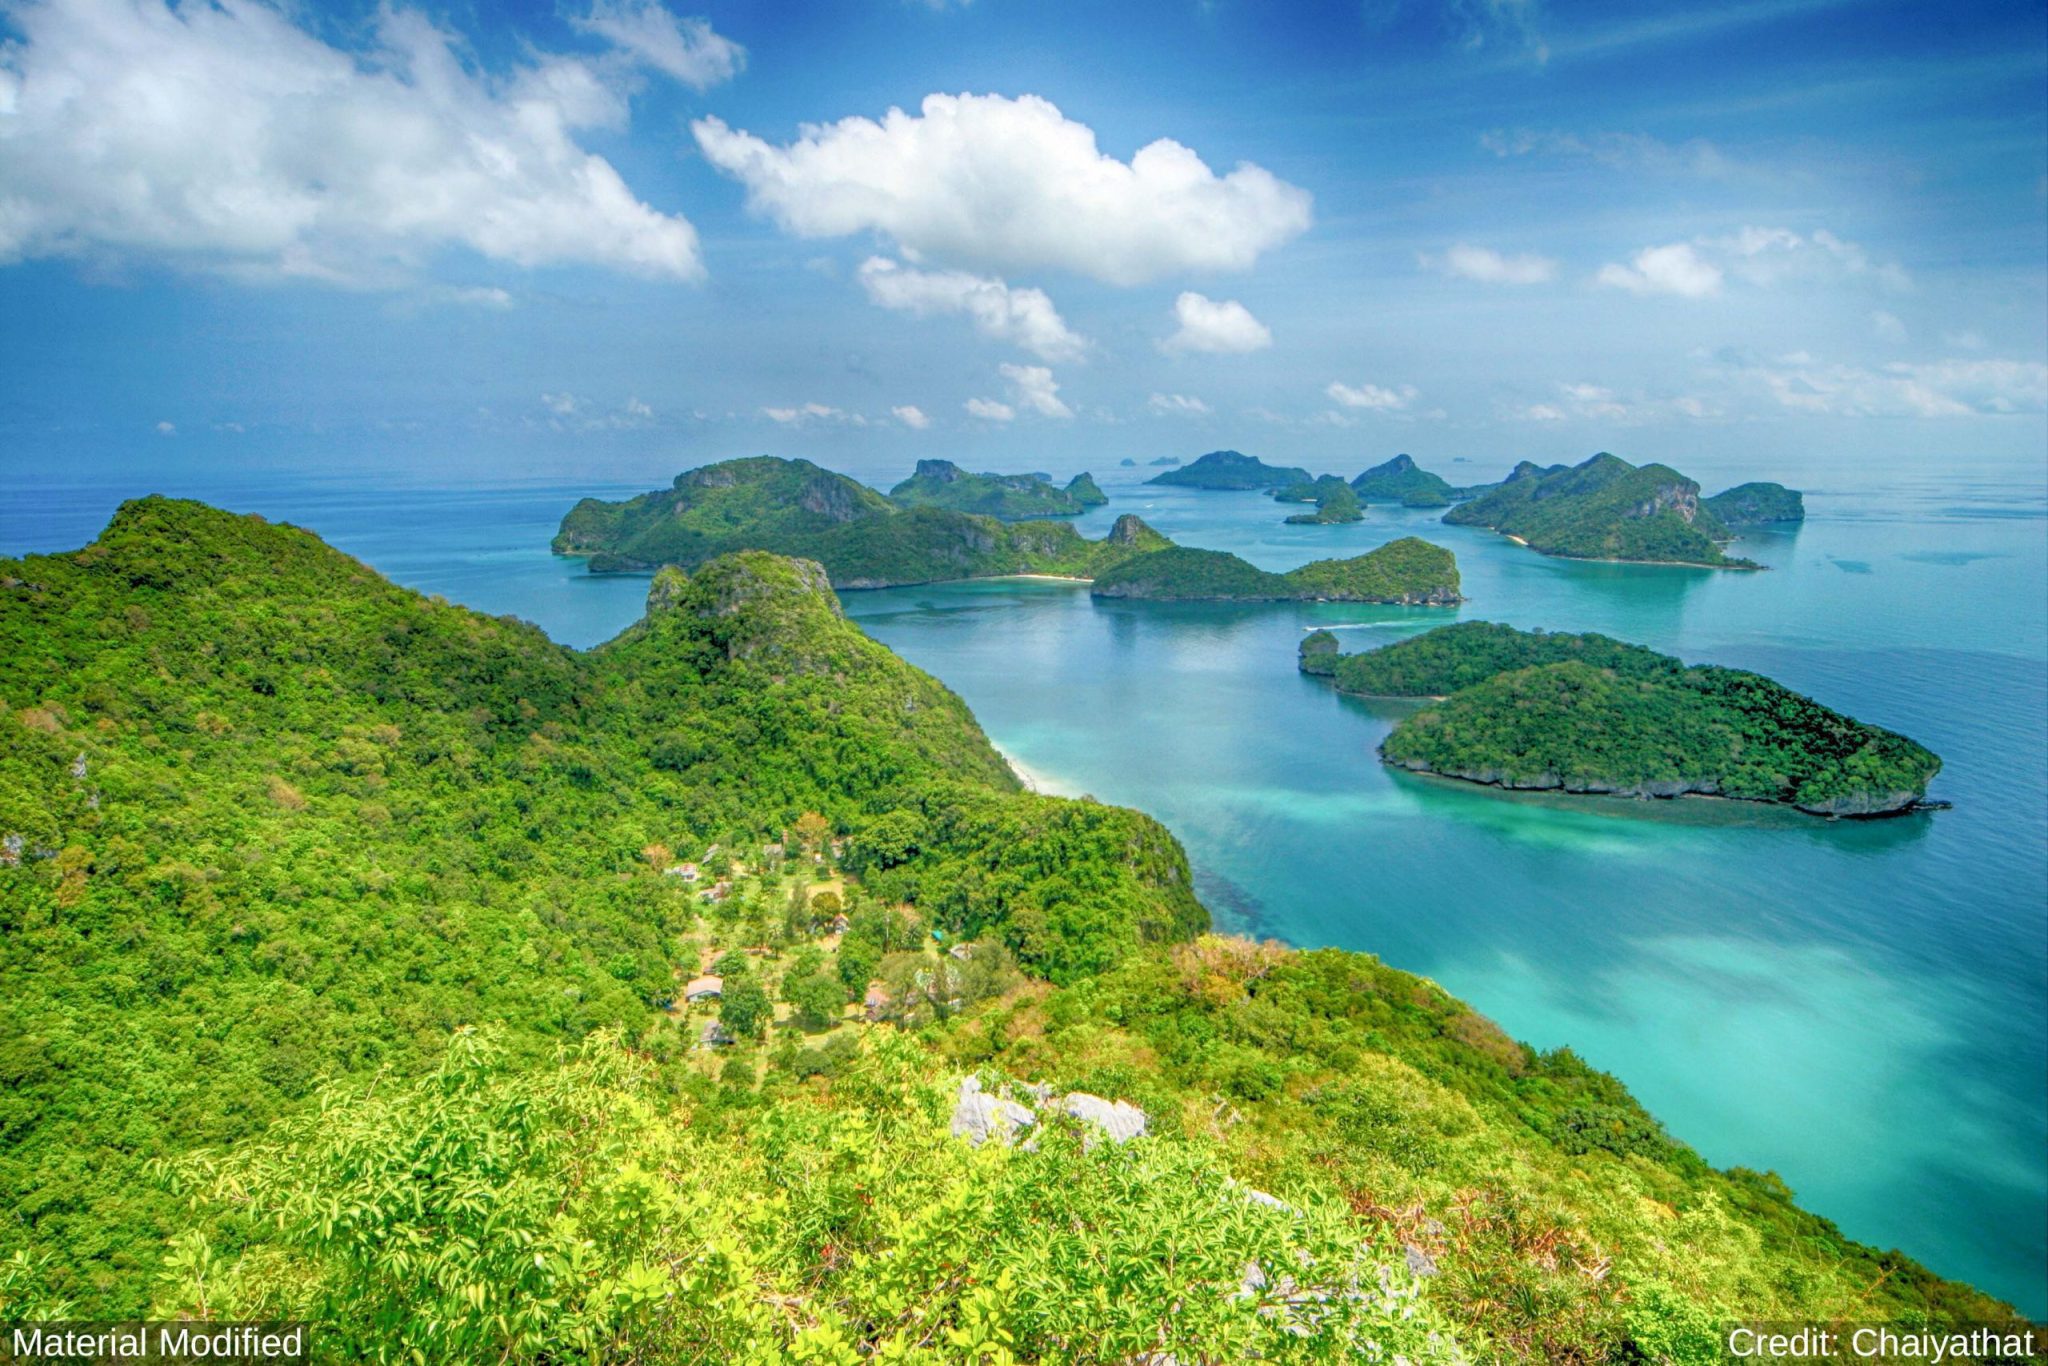 Southern Thailand: See & Experience it ALL in 11 Days, 1st Class Traveling